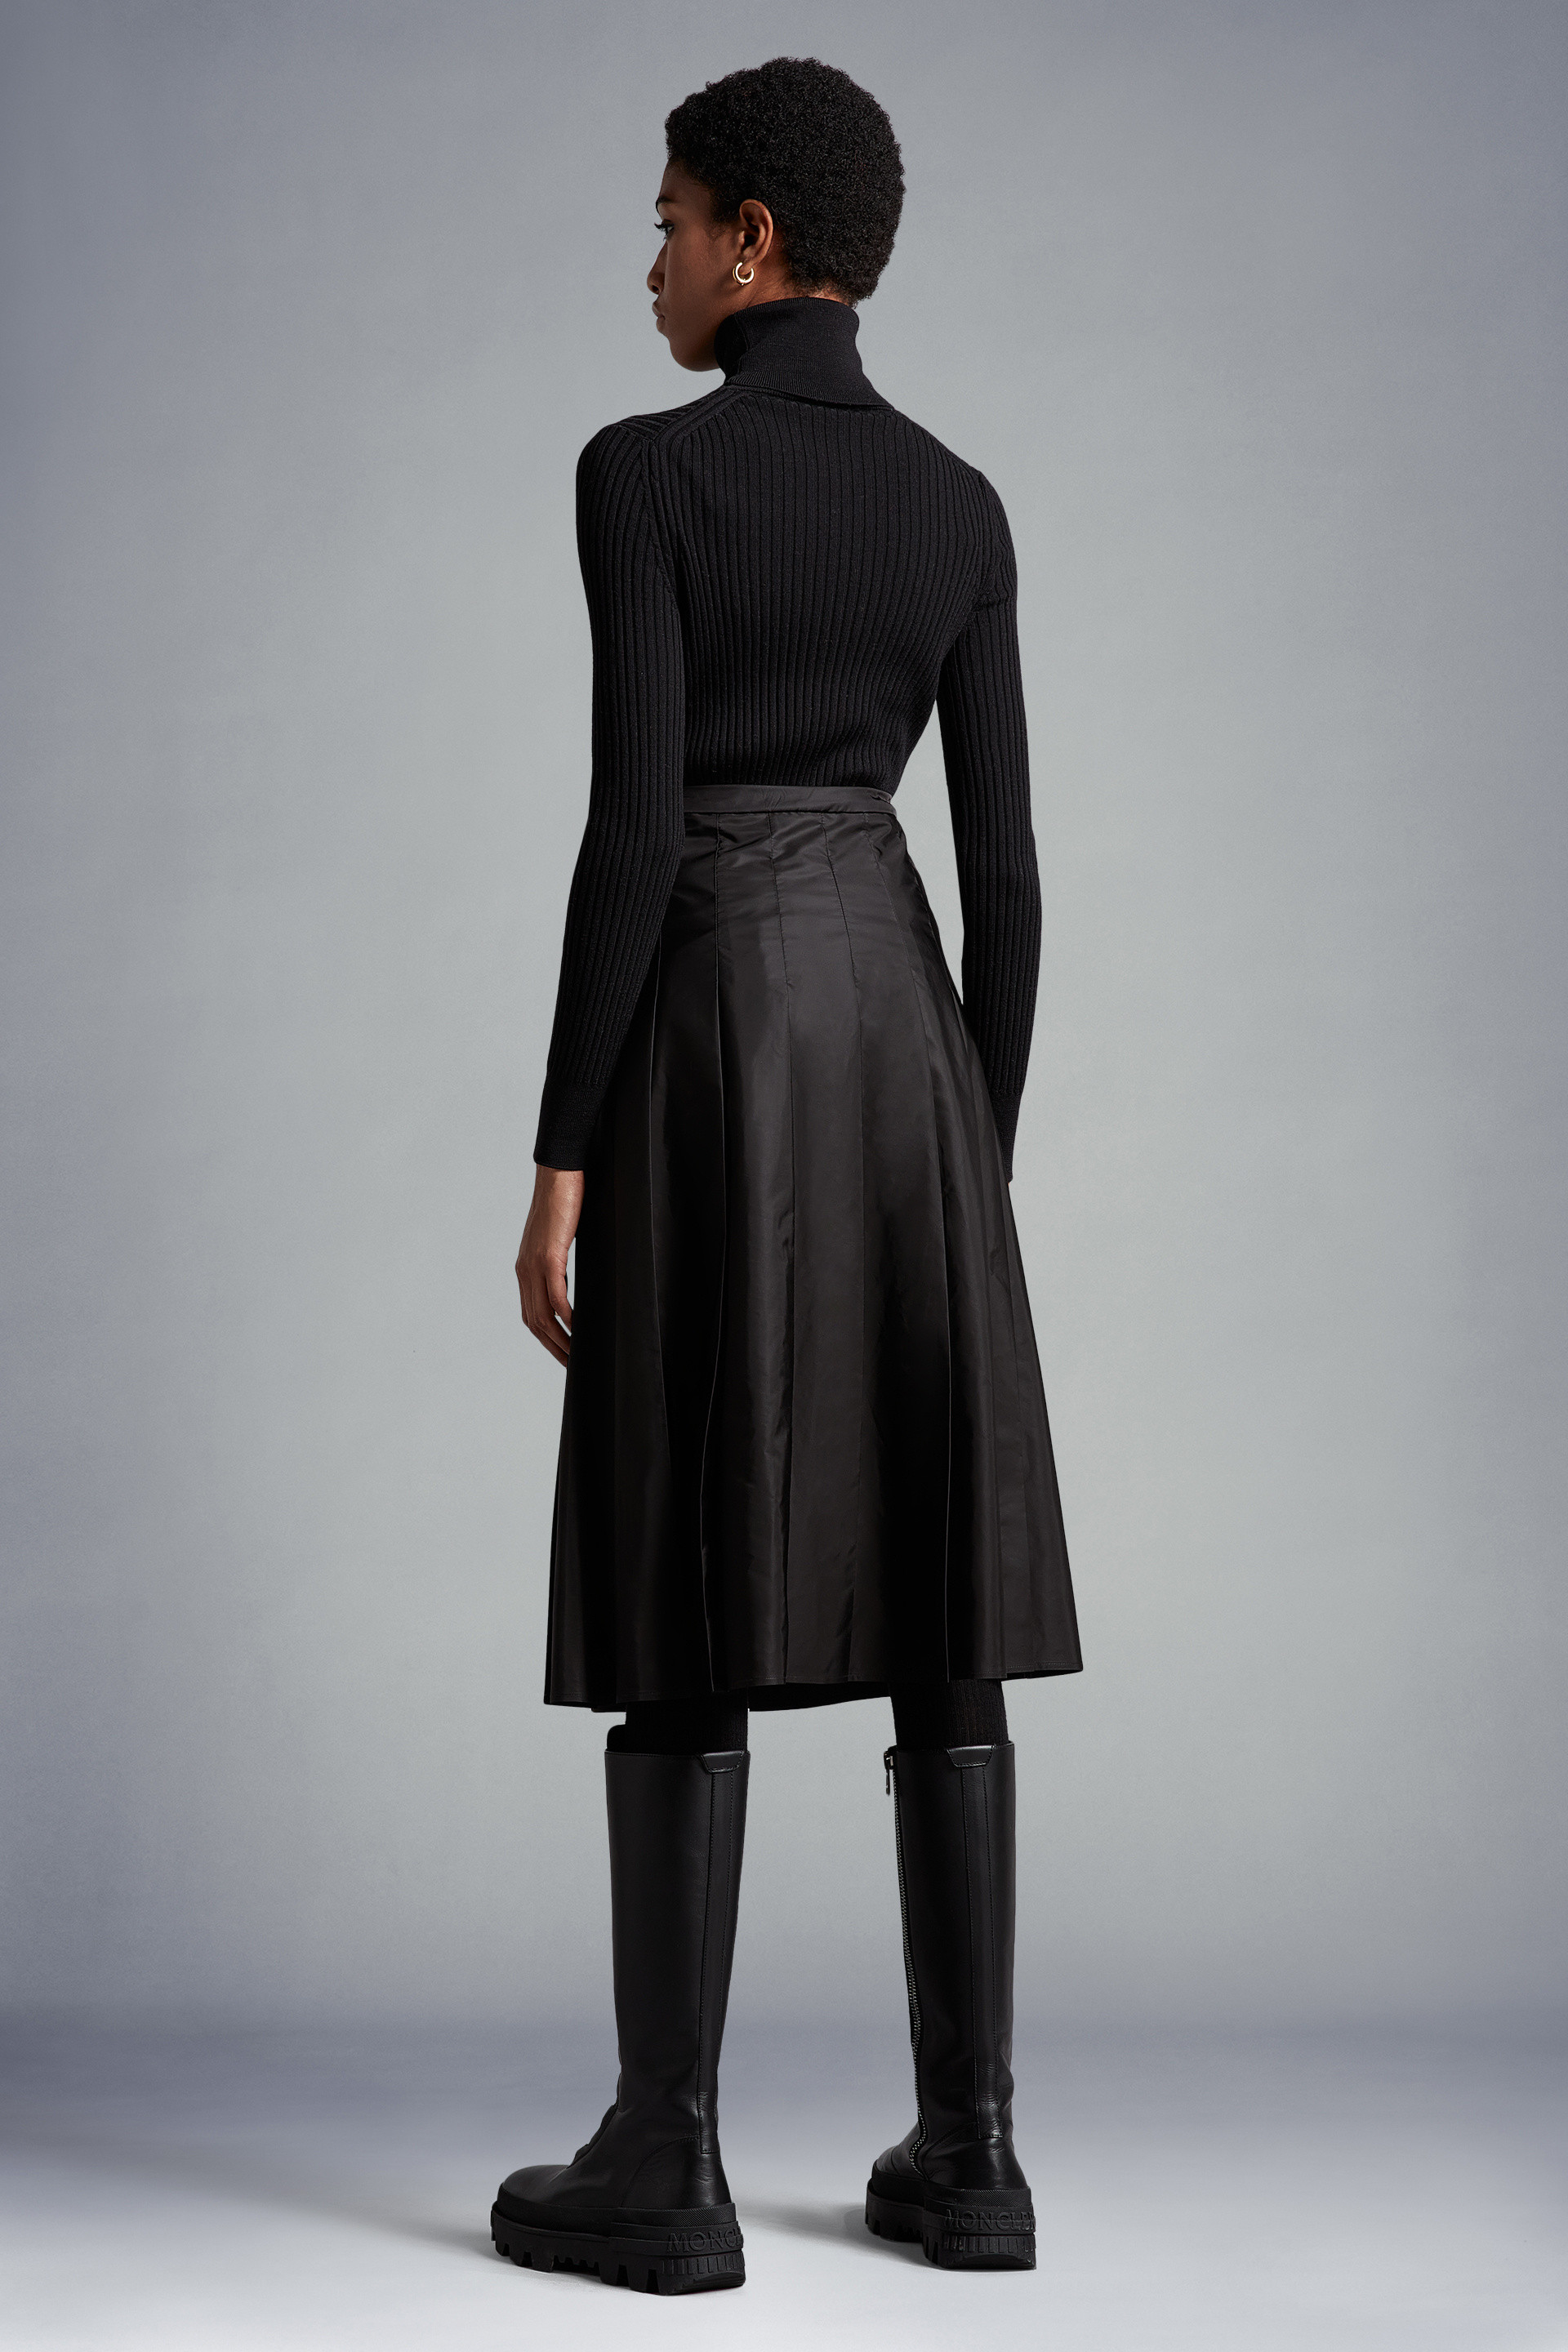 Save 2% Moncler Stretch Cotton Skirt in Black Womens Skirts Moncler Skirts 